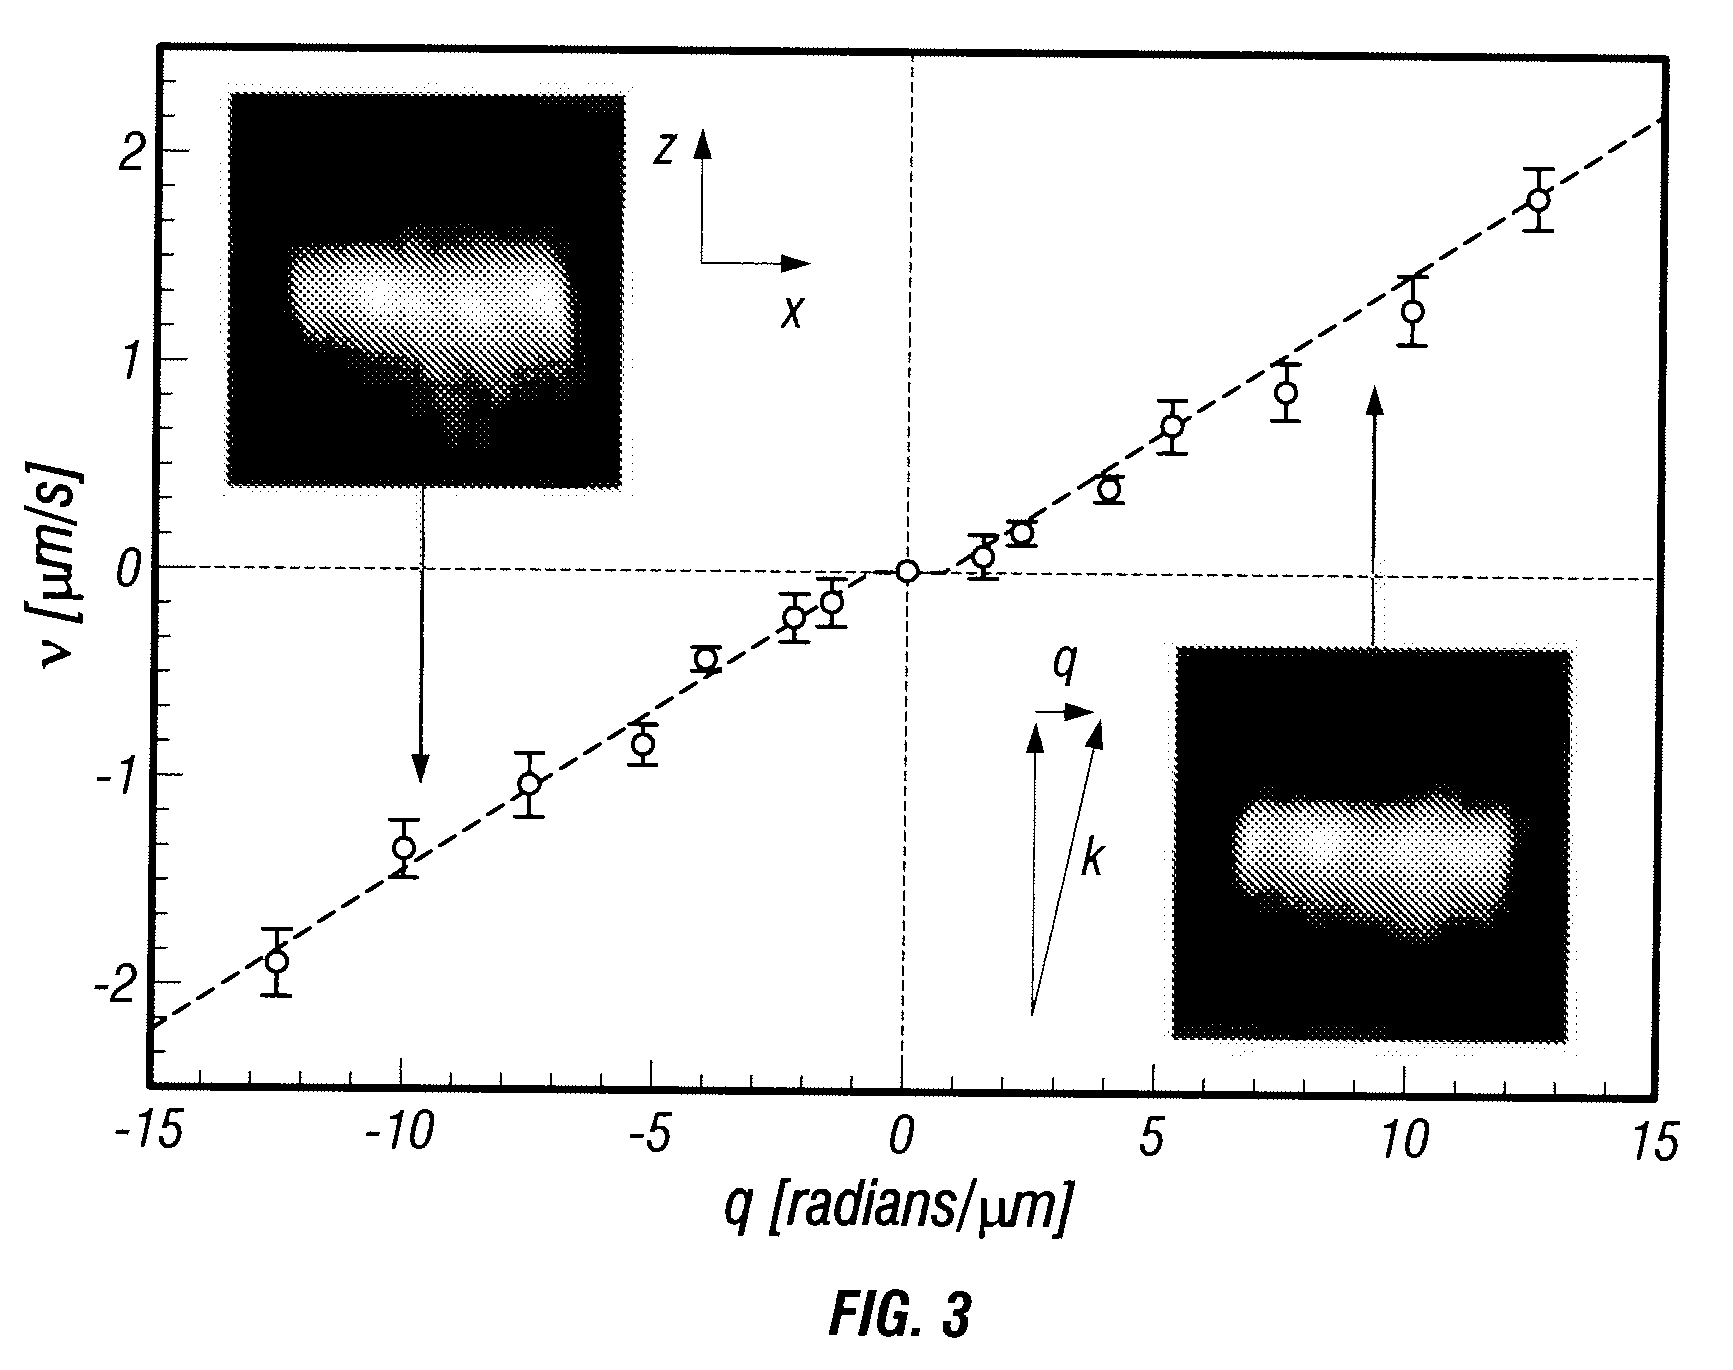 System for applying optical forces from phase gradients